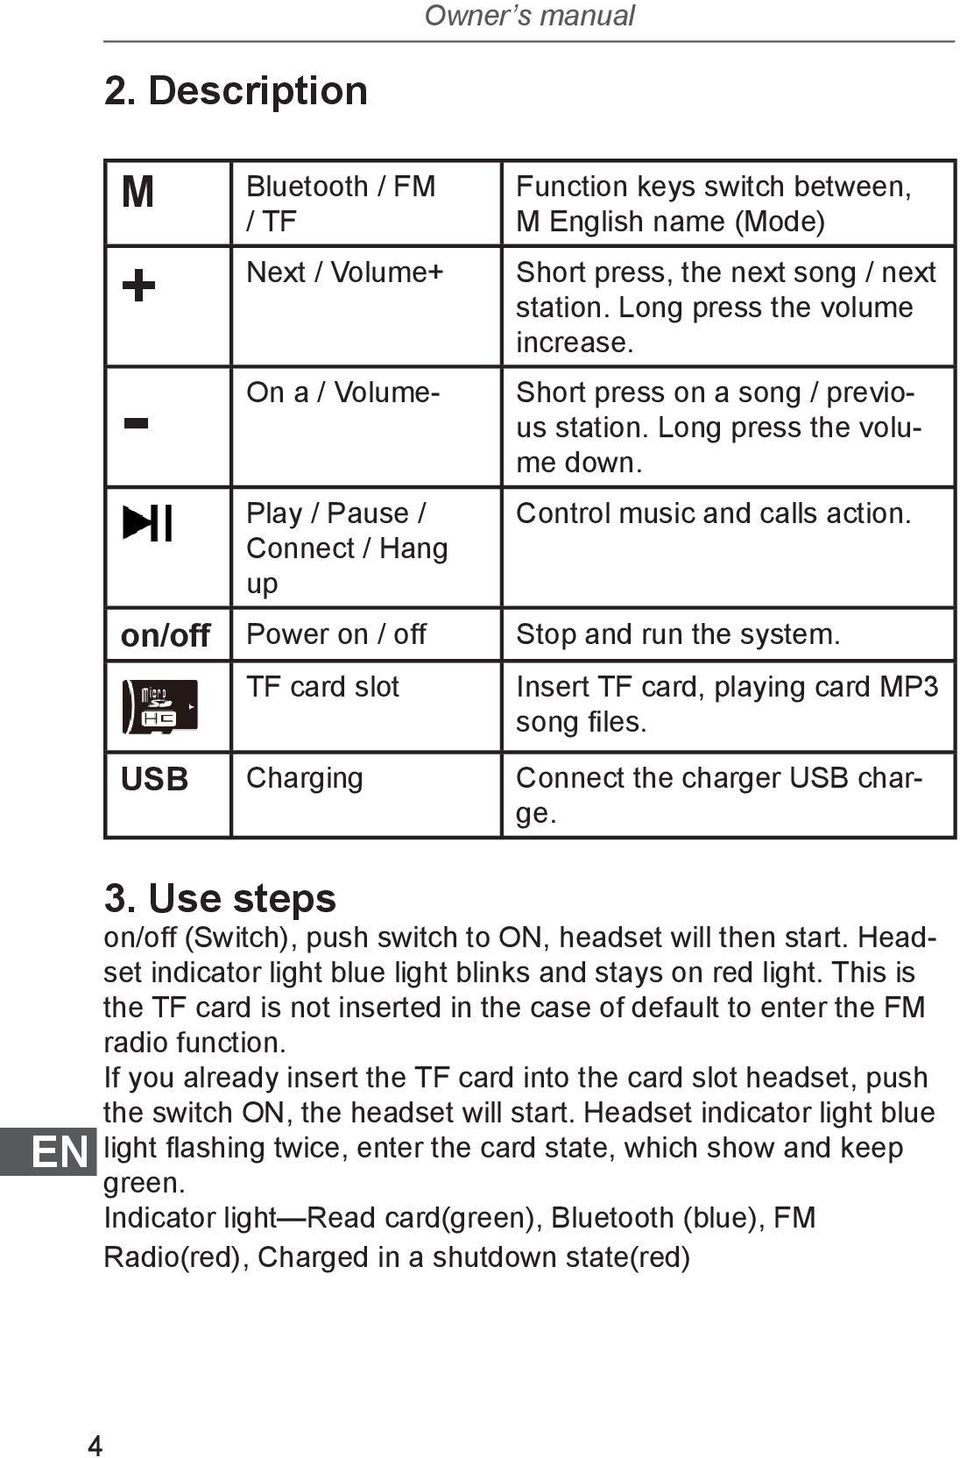 Long press the volume increase. Short press on a song / previous station. Long press the volume down. Control music and calls action. on/off Power on / off Stop and run the system.